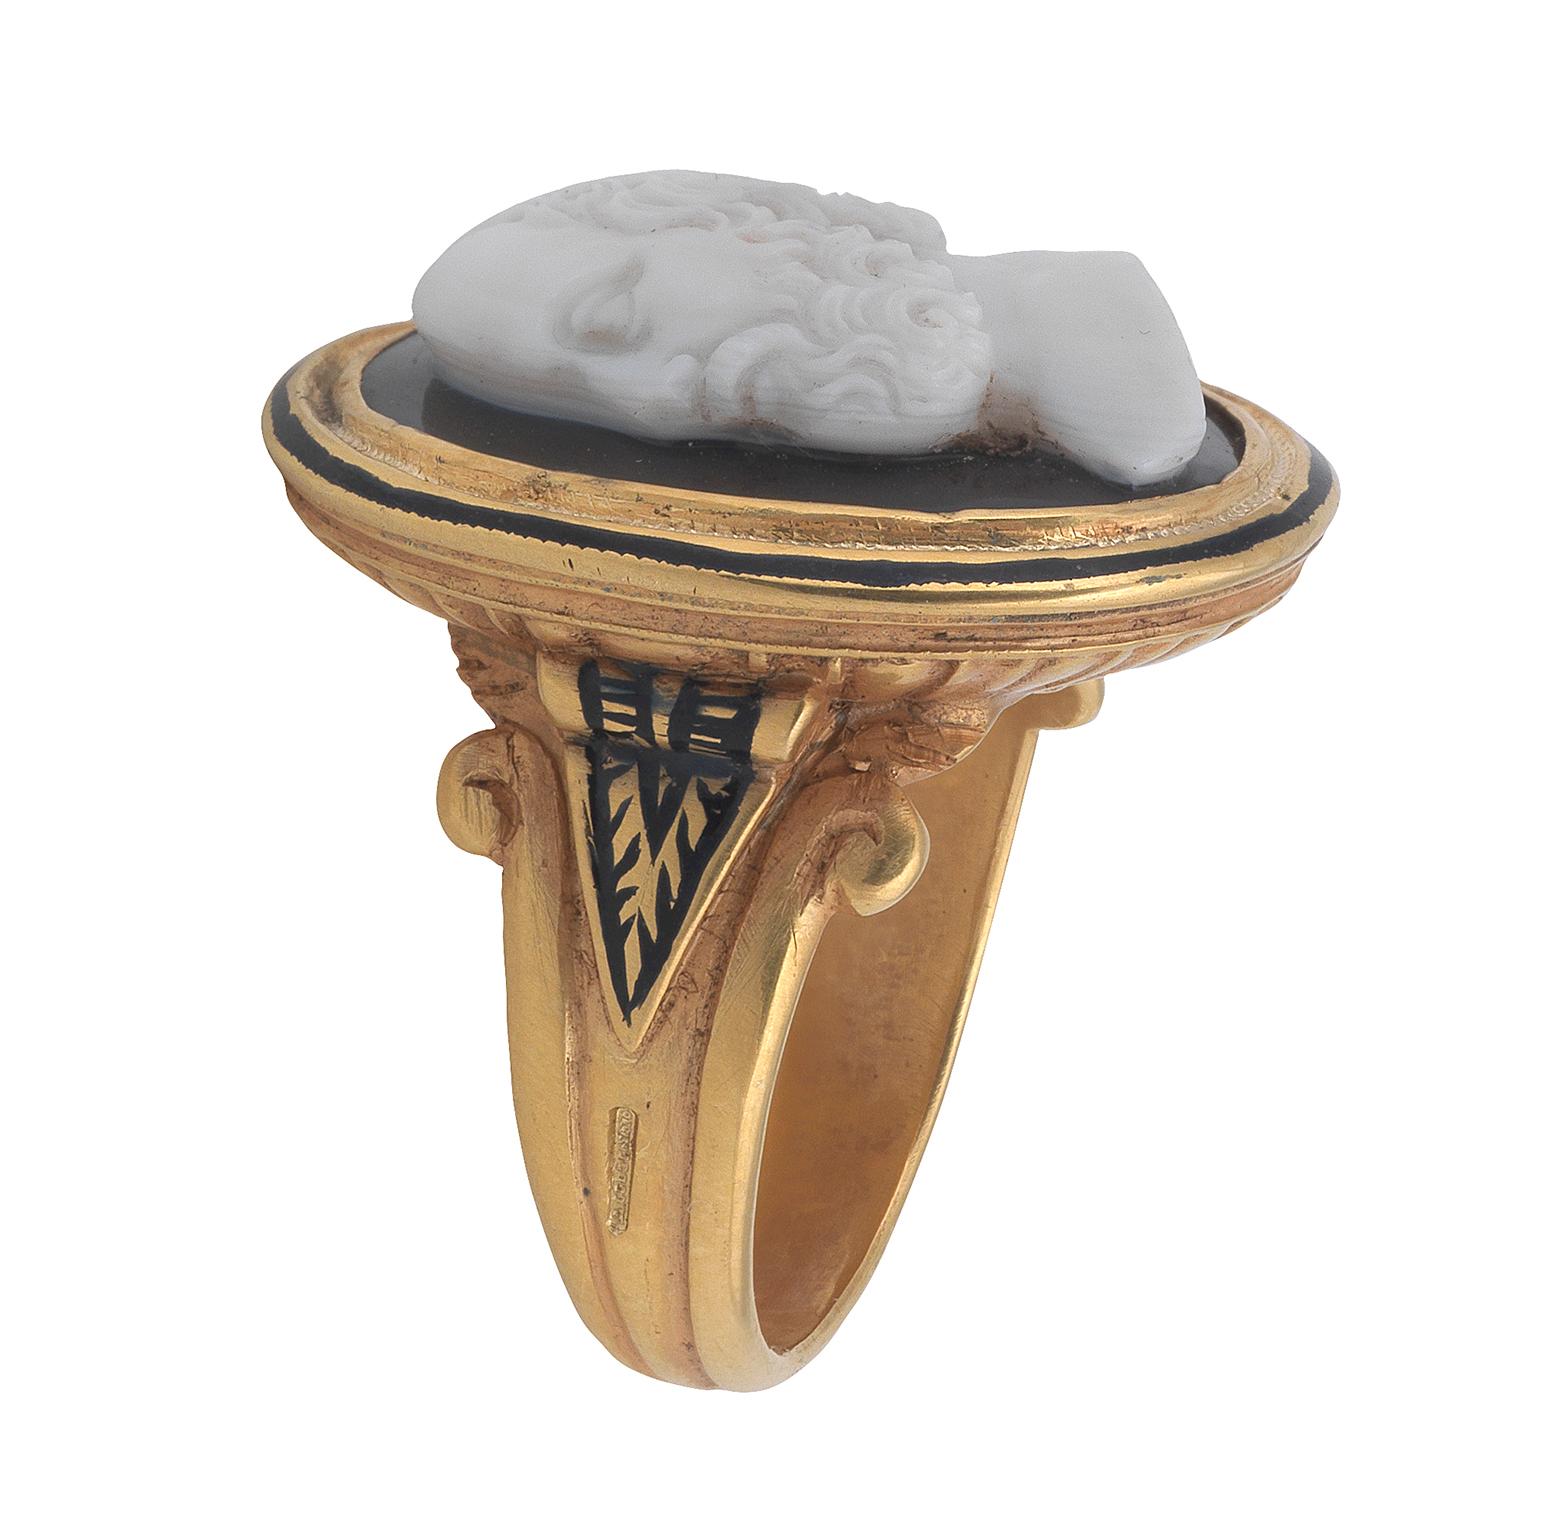 A late 18th century agate cameo later mounted by Codognato, the oval cameo measiring 2,2cm x 1,9cm and depicting Platone in profile looking left, rub-over set in gold mount with black enamel decorations and tapering shoulders, cameo circa 1790, the